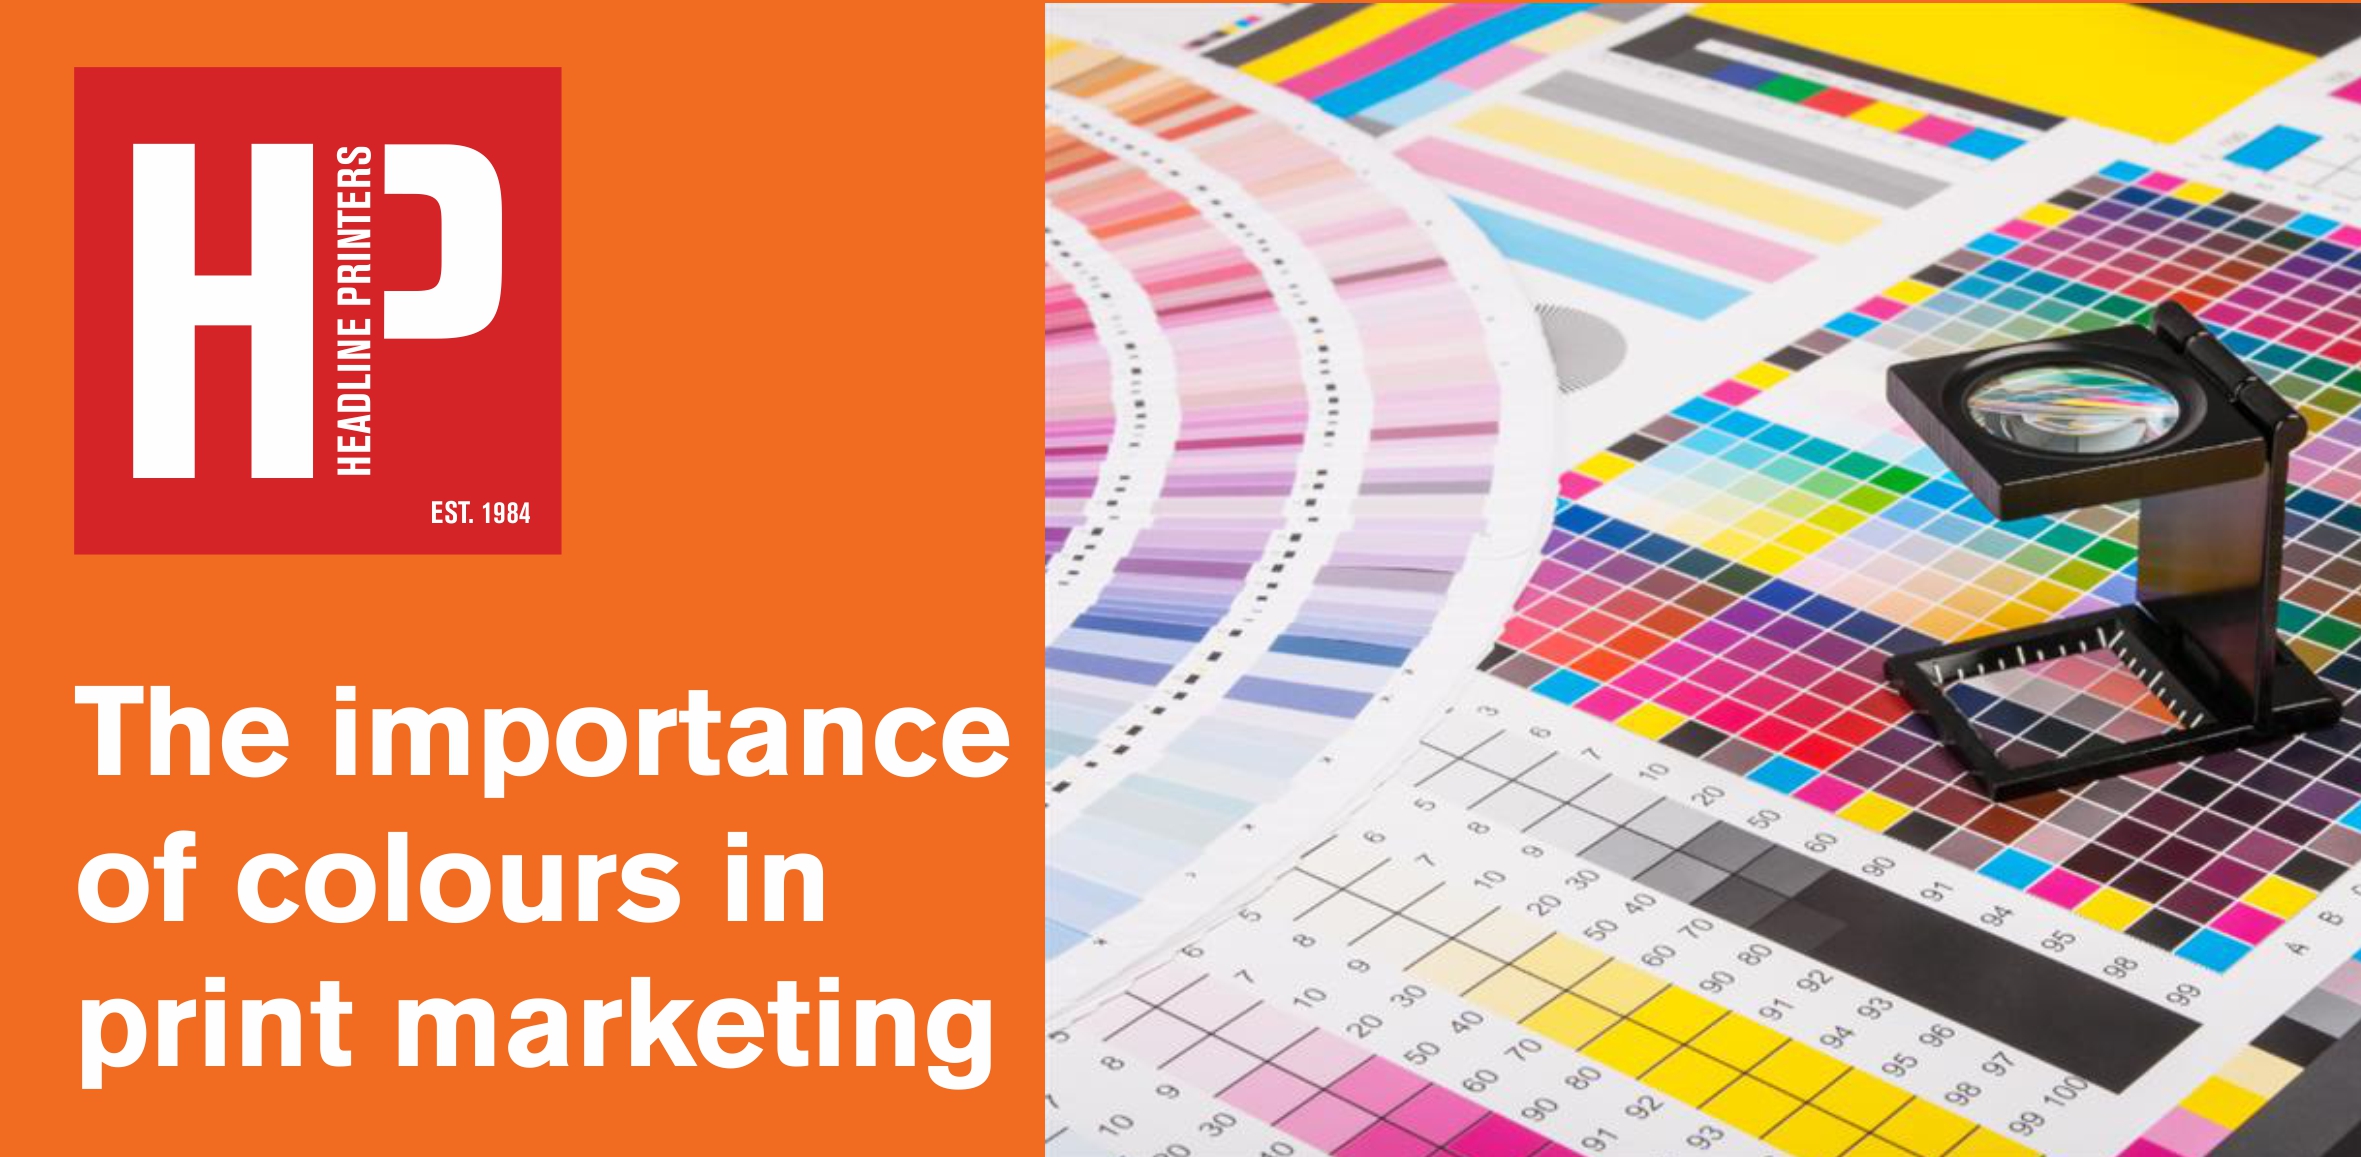 The importance of colours in print marketing